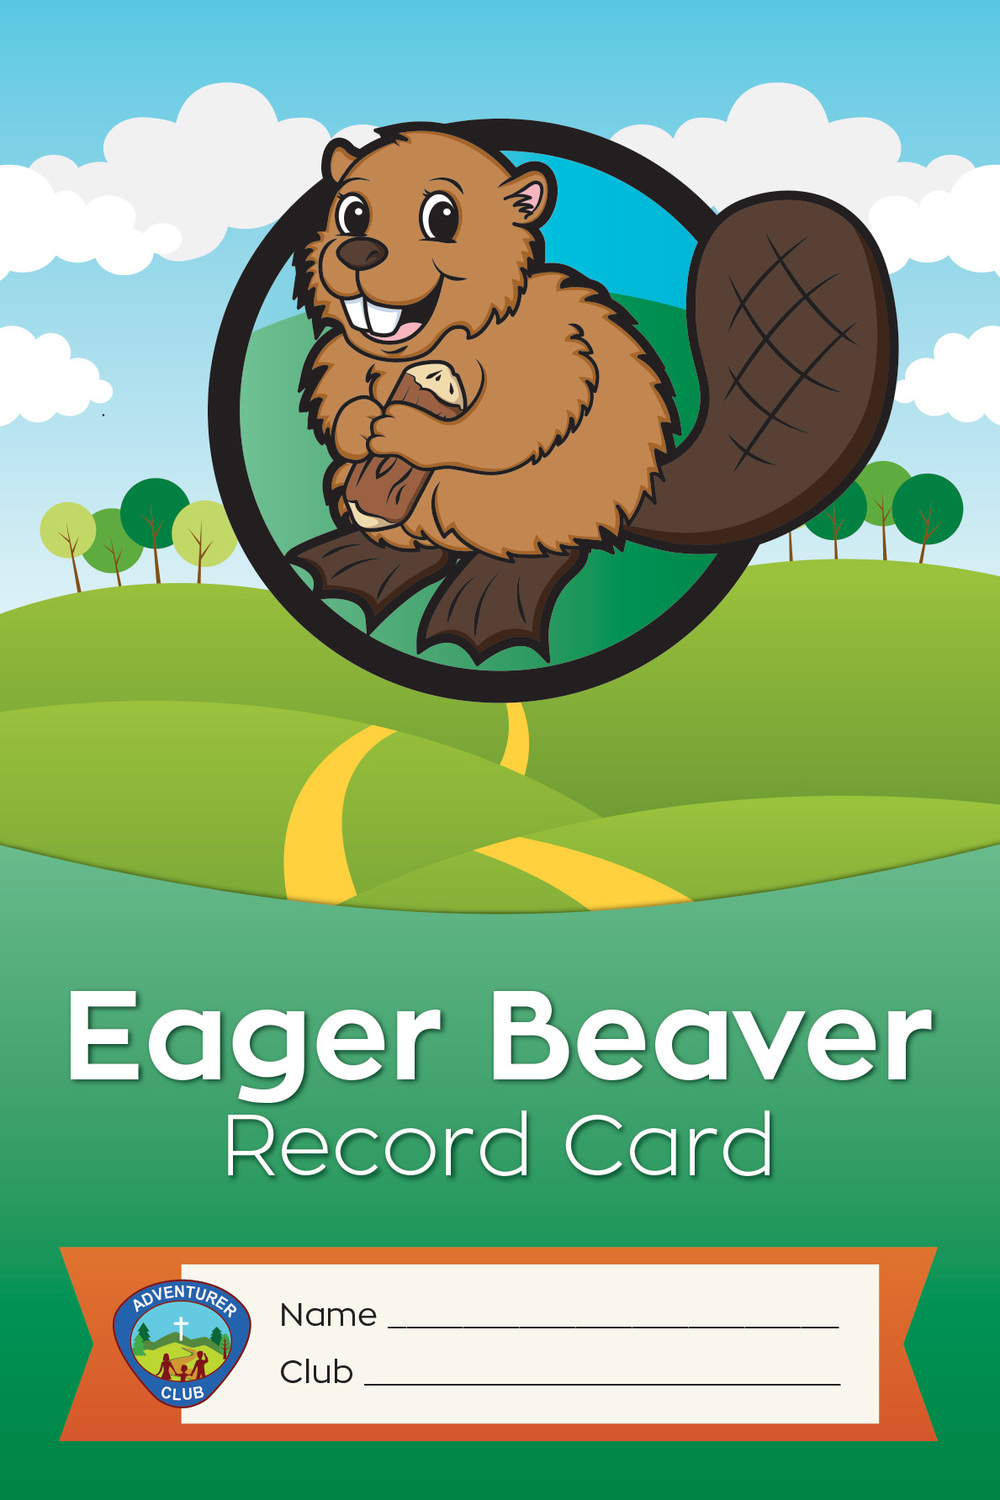 Eager Beaver Record Card